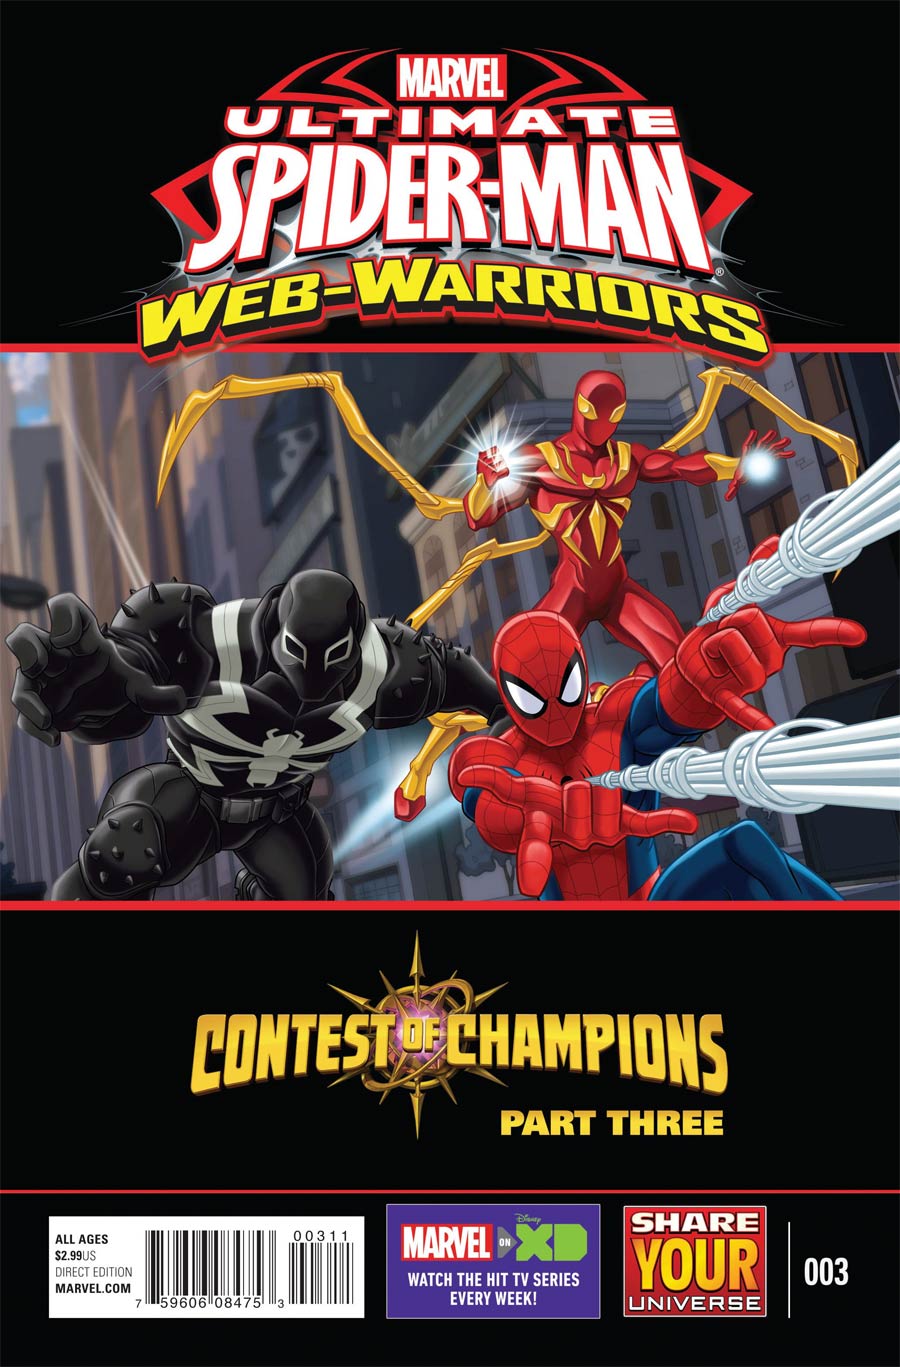 Marvel Universe Ultimate Spider-Man Contest Of Champions #3